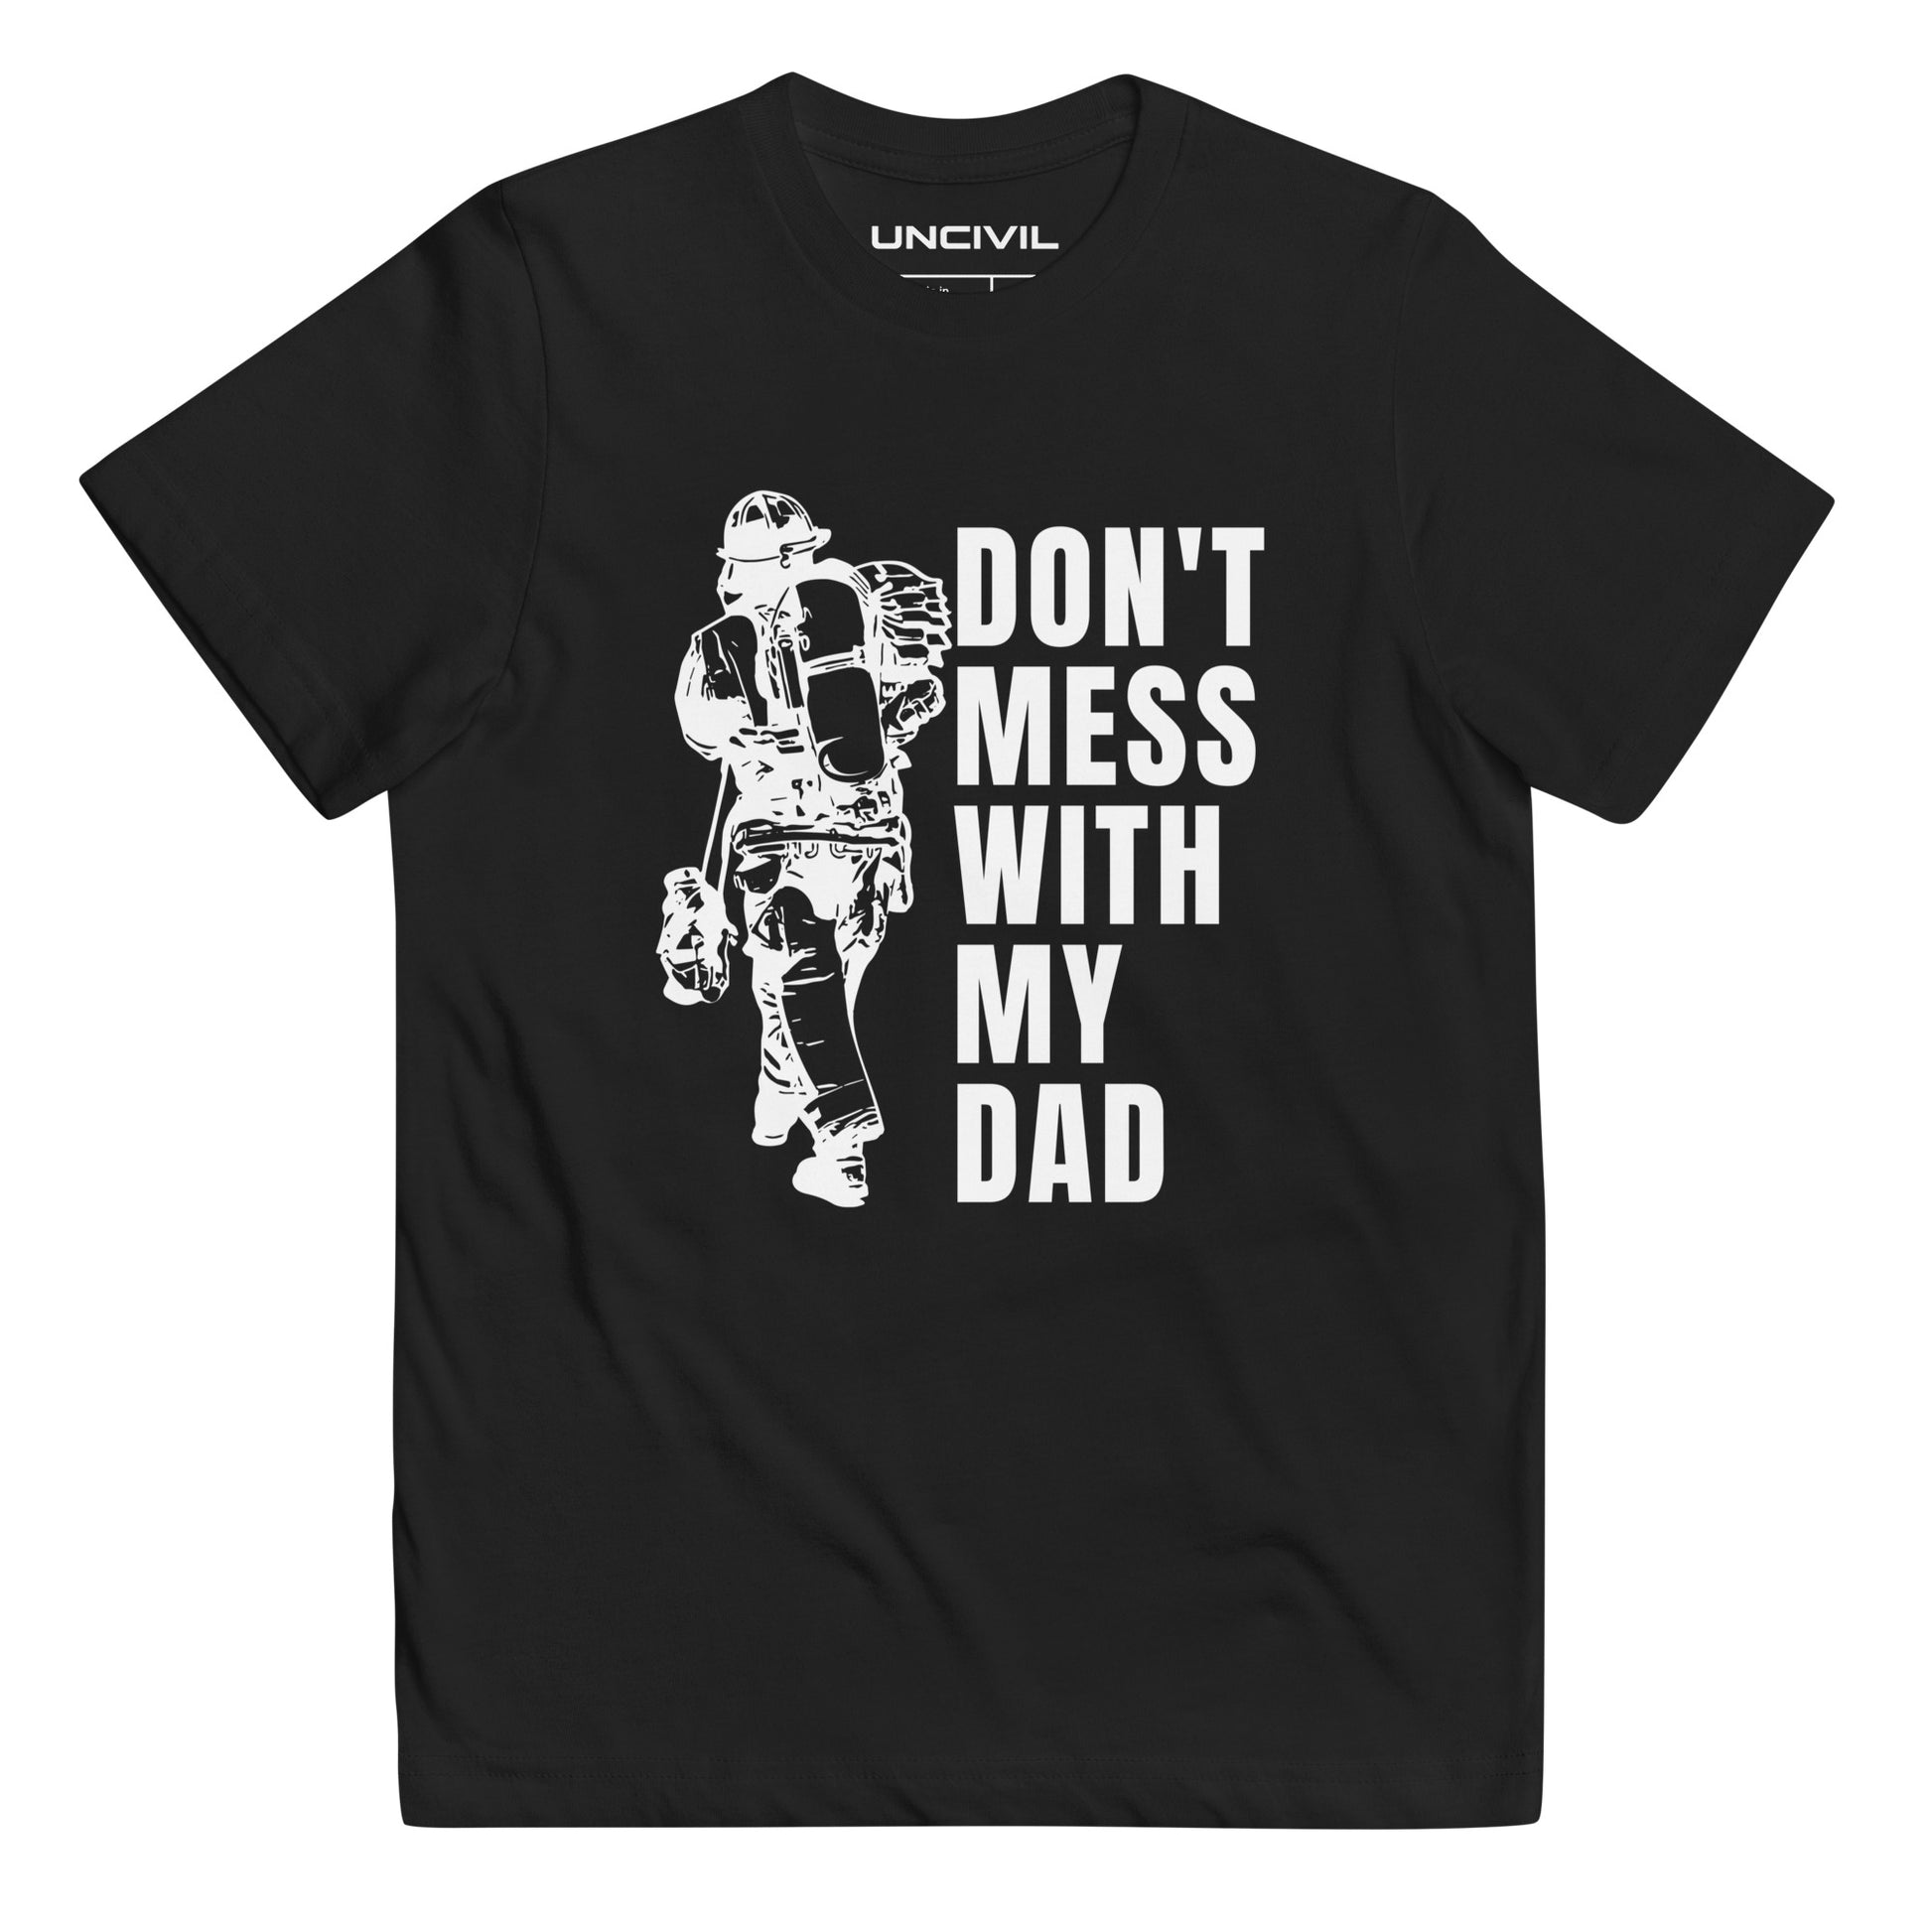 Kids Don't Mess with my Dad, Firefighter shirt. Black youth shirt.